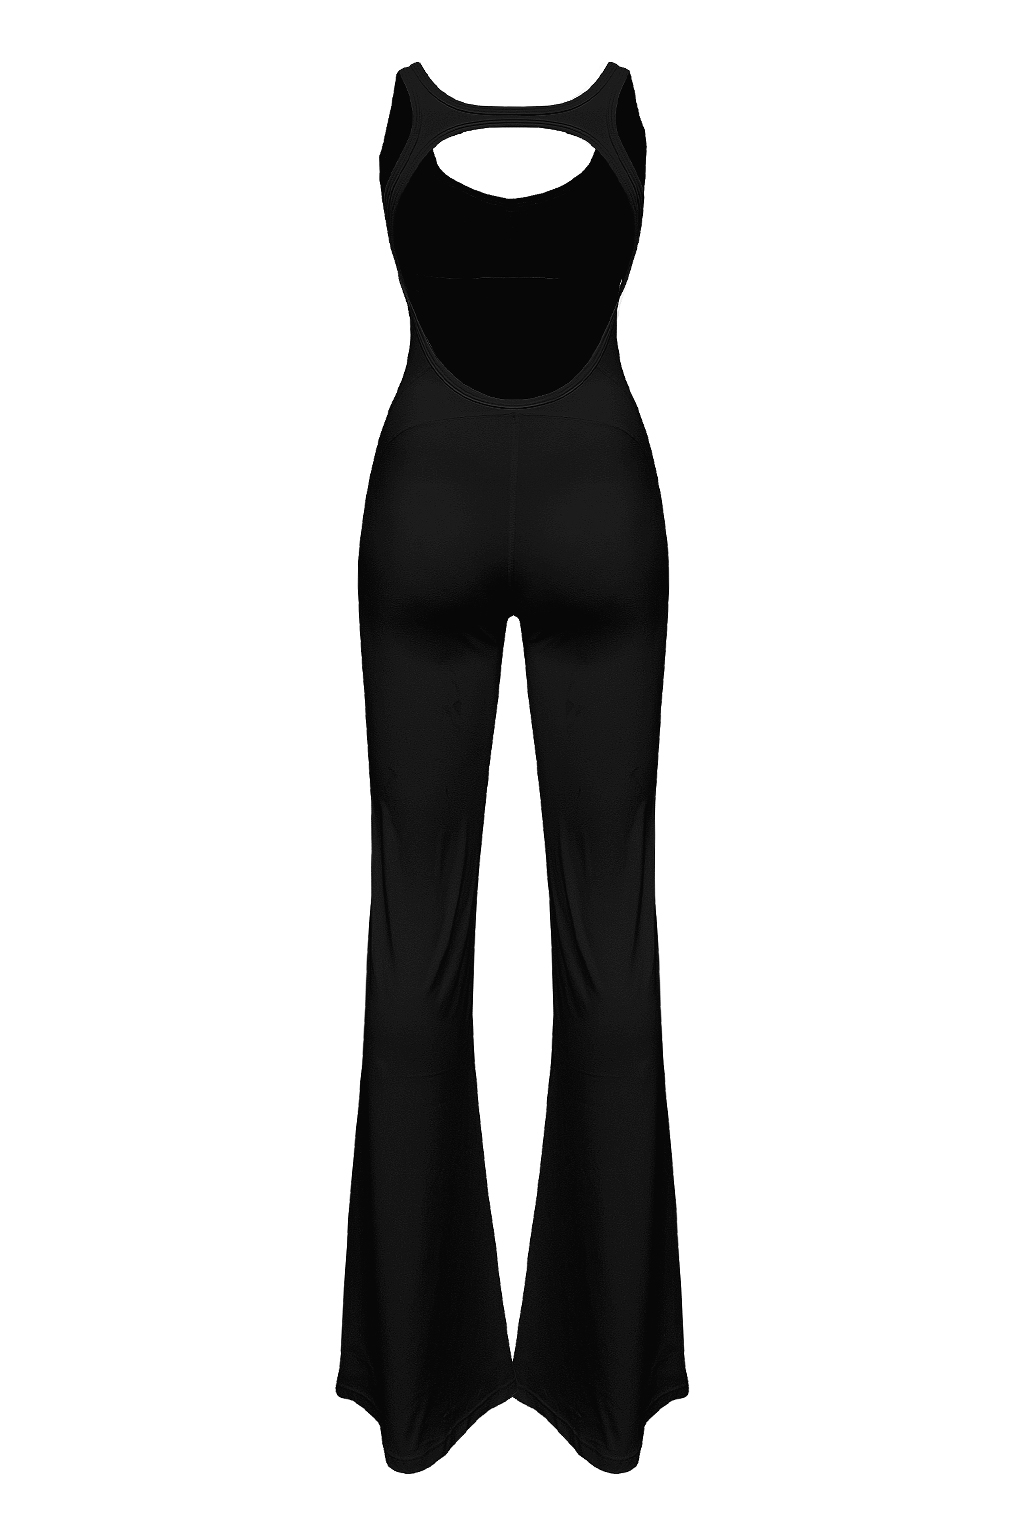 All-in-one Backless Jump Suit Bootcut Black